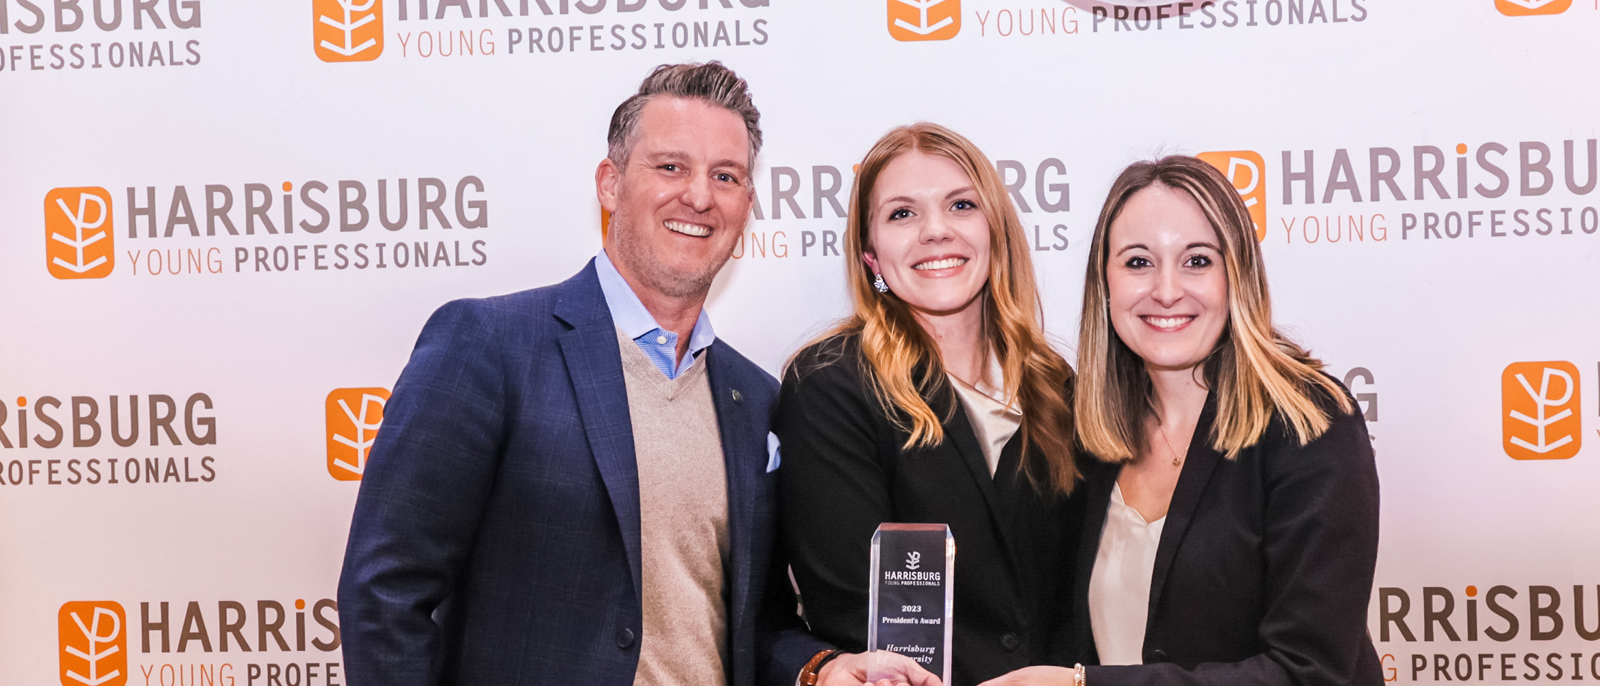 Harrisburg Young Professionals (HYP) Honors HU With President’s Award at Annual Meeting